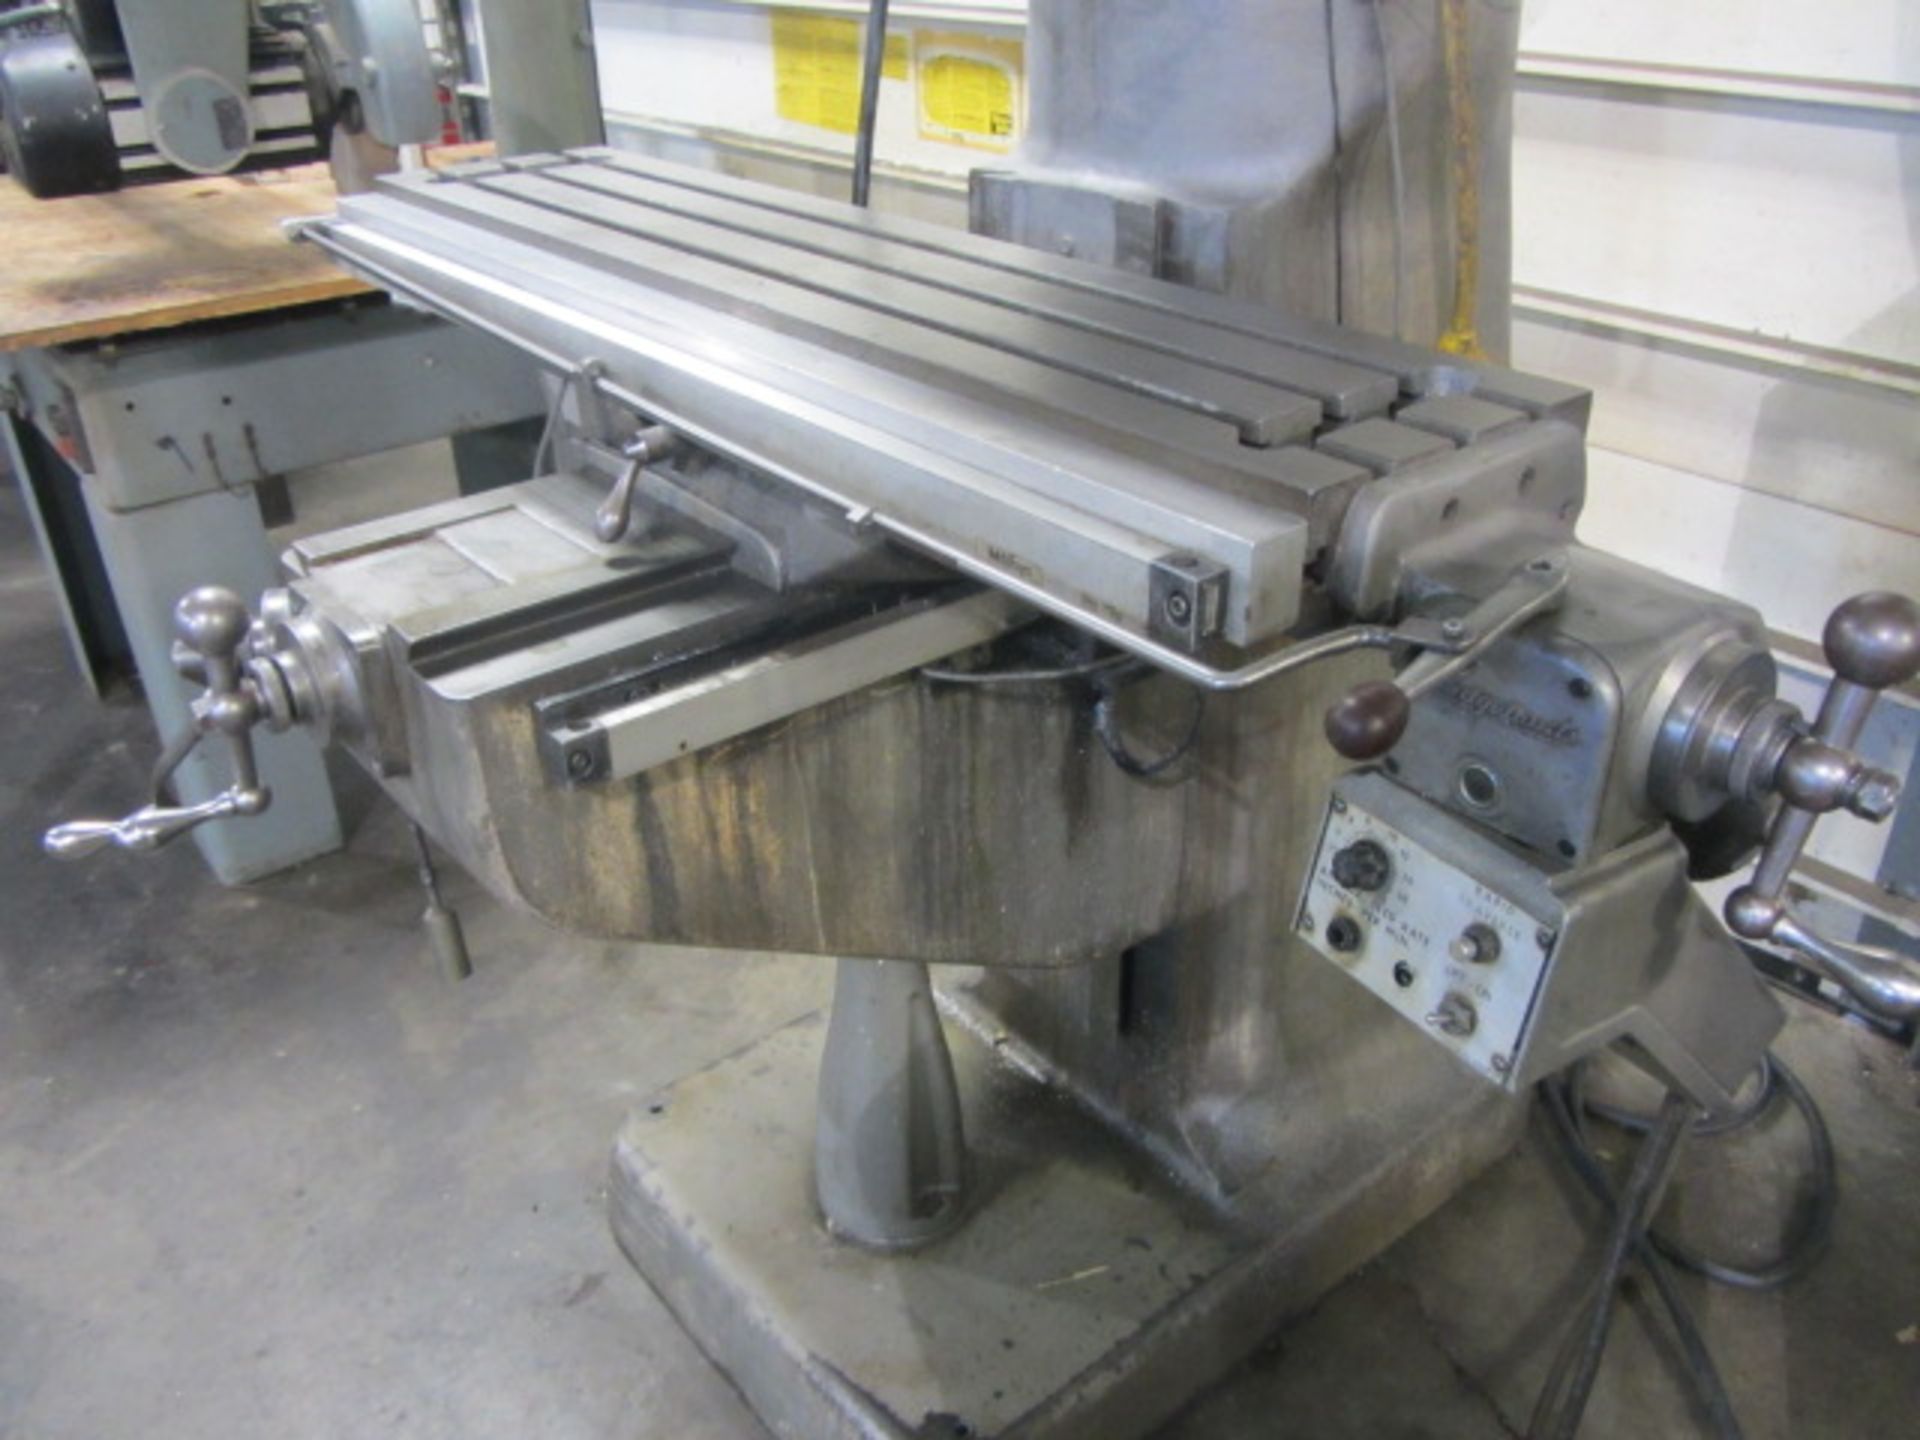 Bridgeport Vertical Milling Machine with 9'' x 42'' Power Feed Table, R8 Taper, Spindle Speeds to - Image 3 of 4